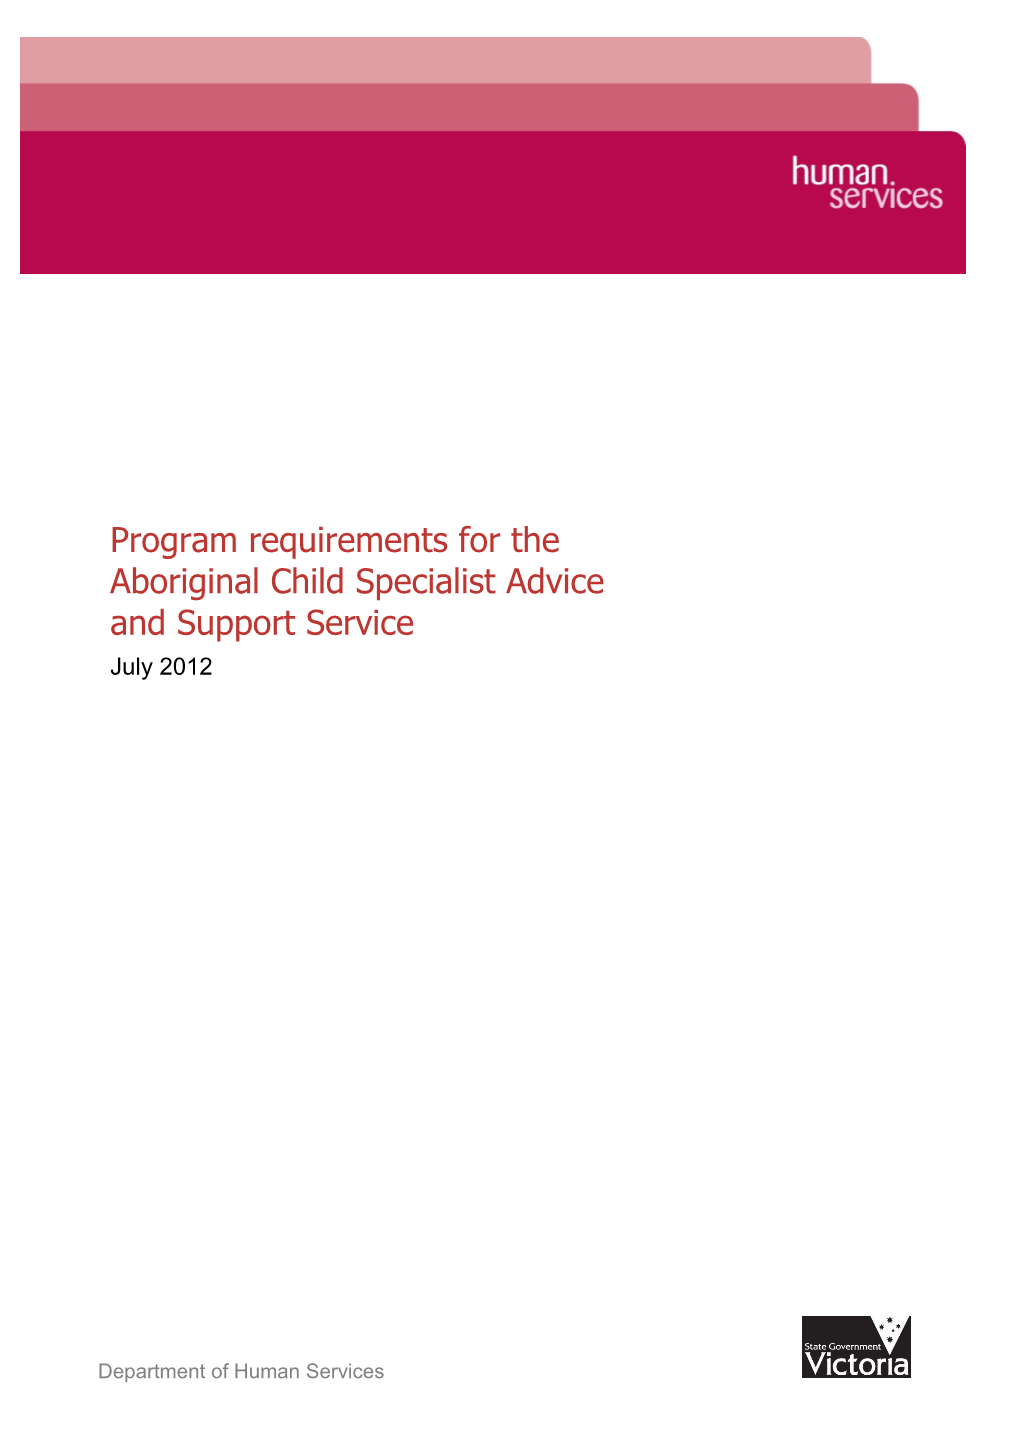 Program Requirements For The Aboriginal Child Specialist Advice And Support Service